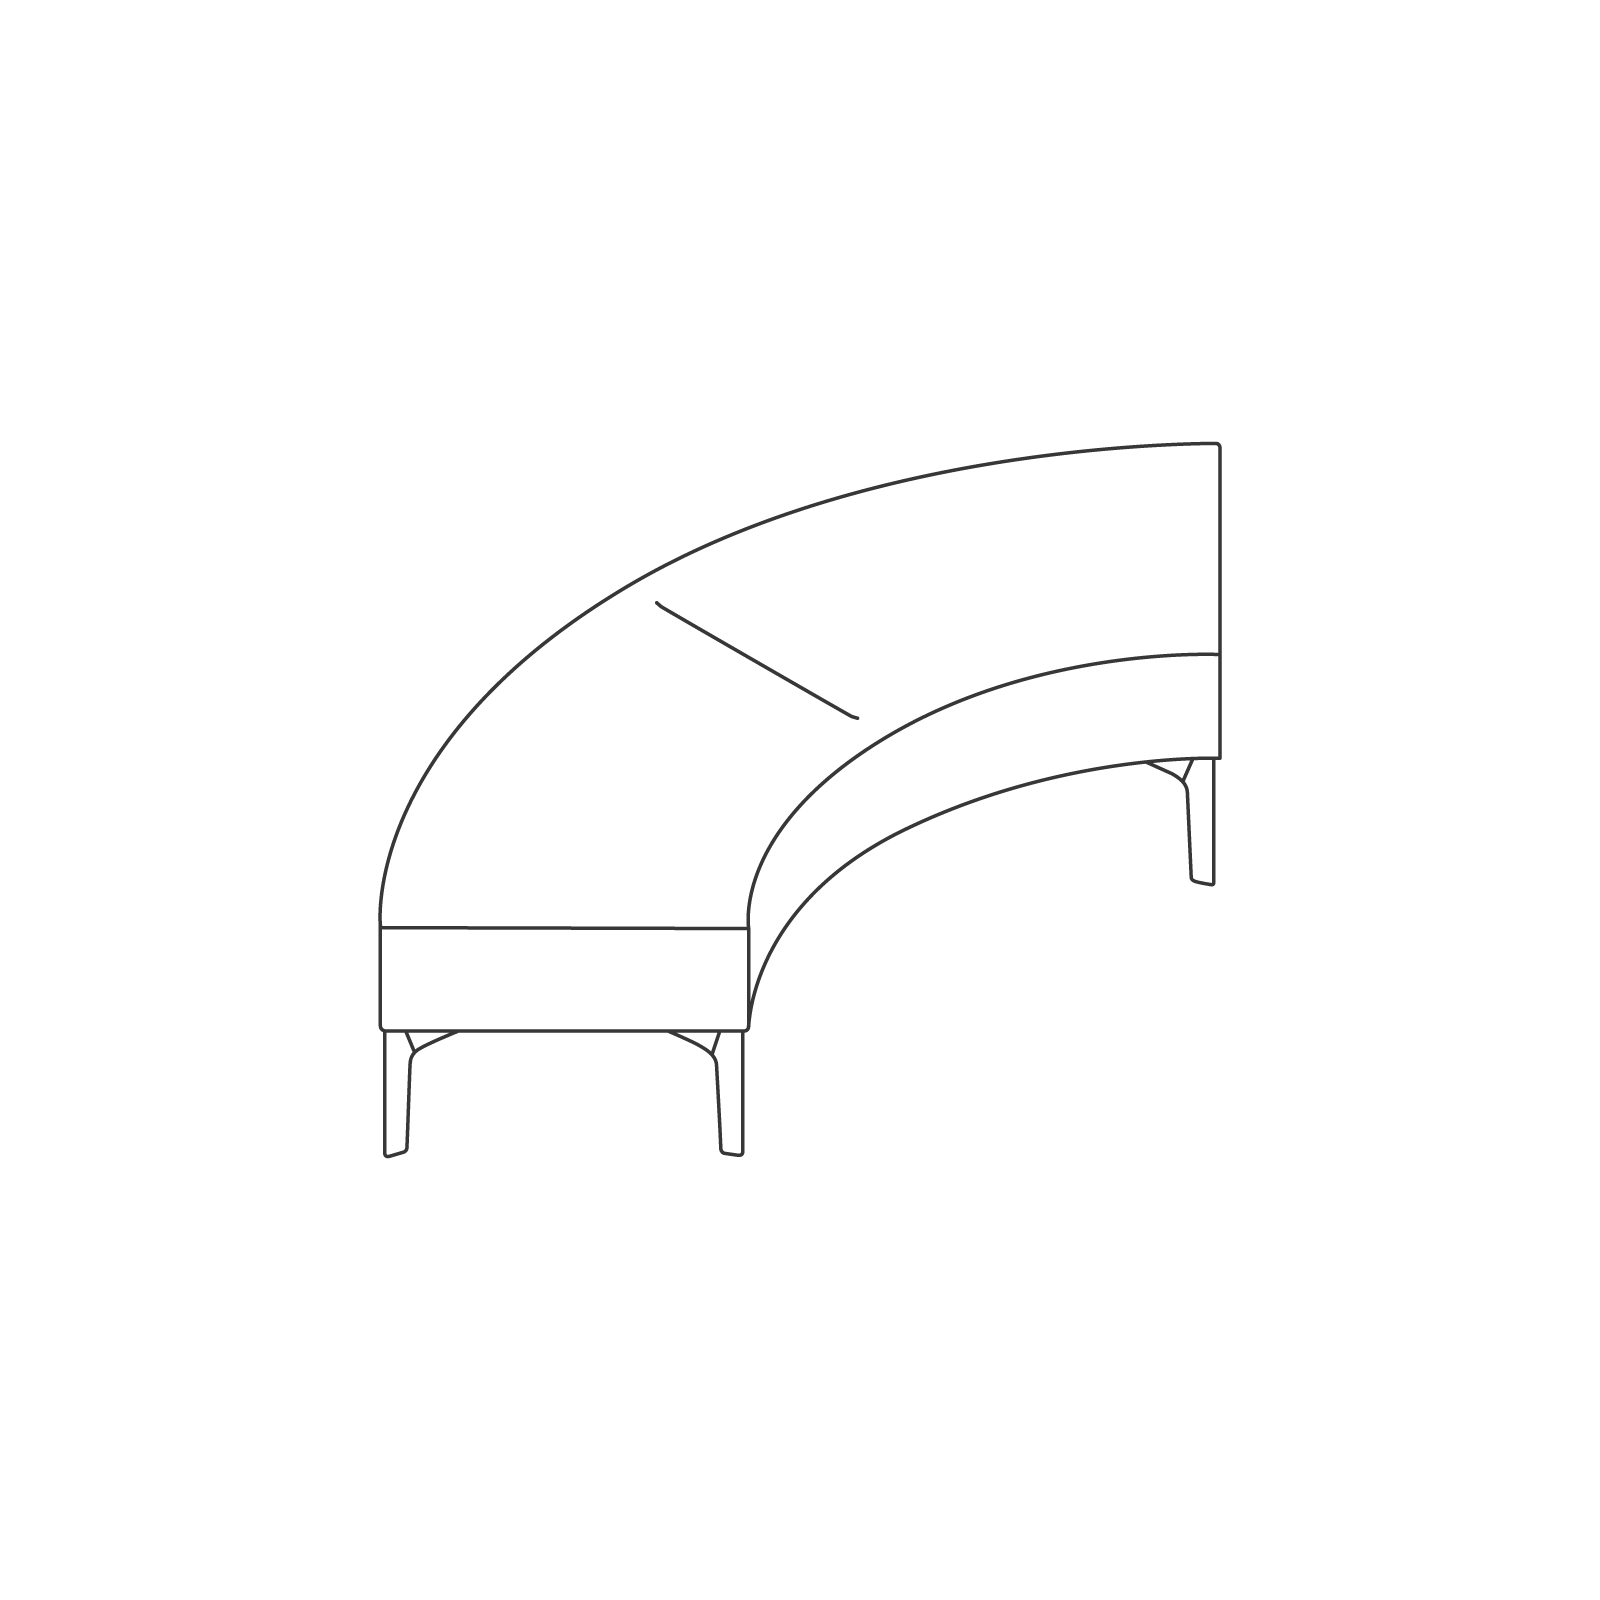 A line drawing - Symbol Bench–90-Degree External Curve